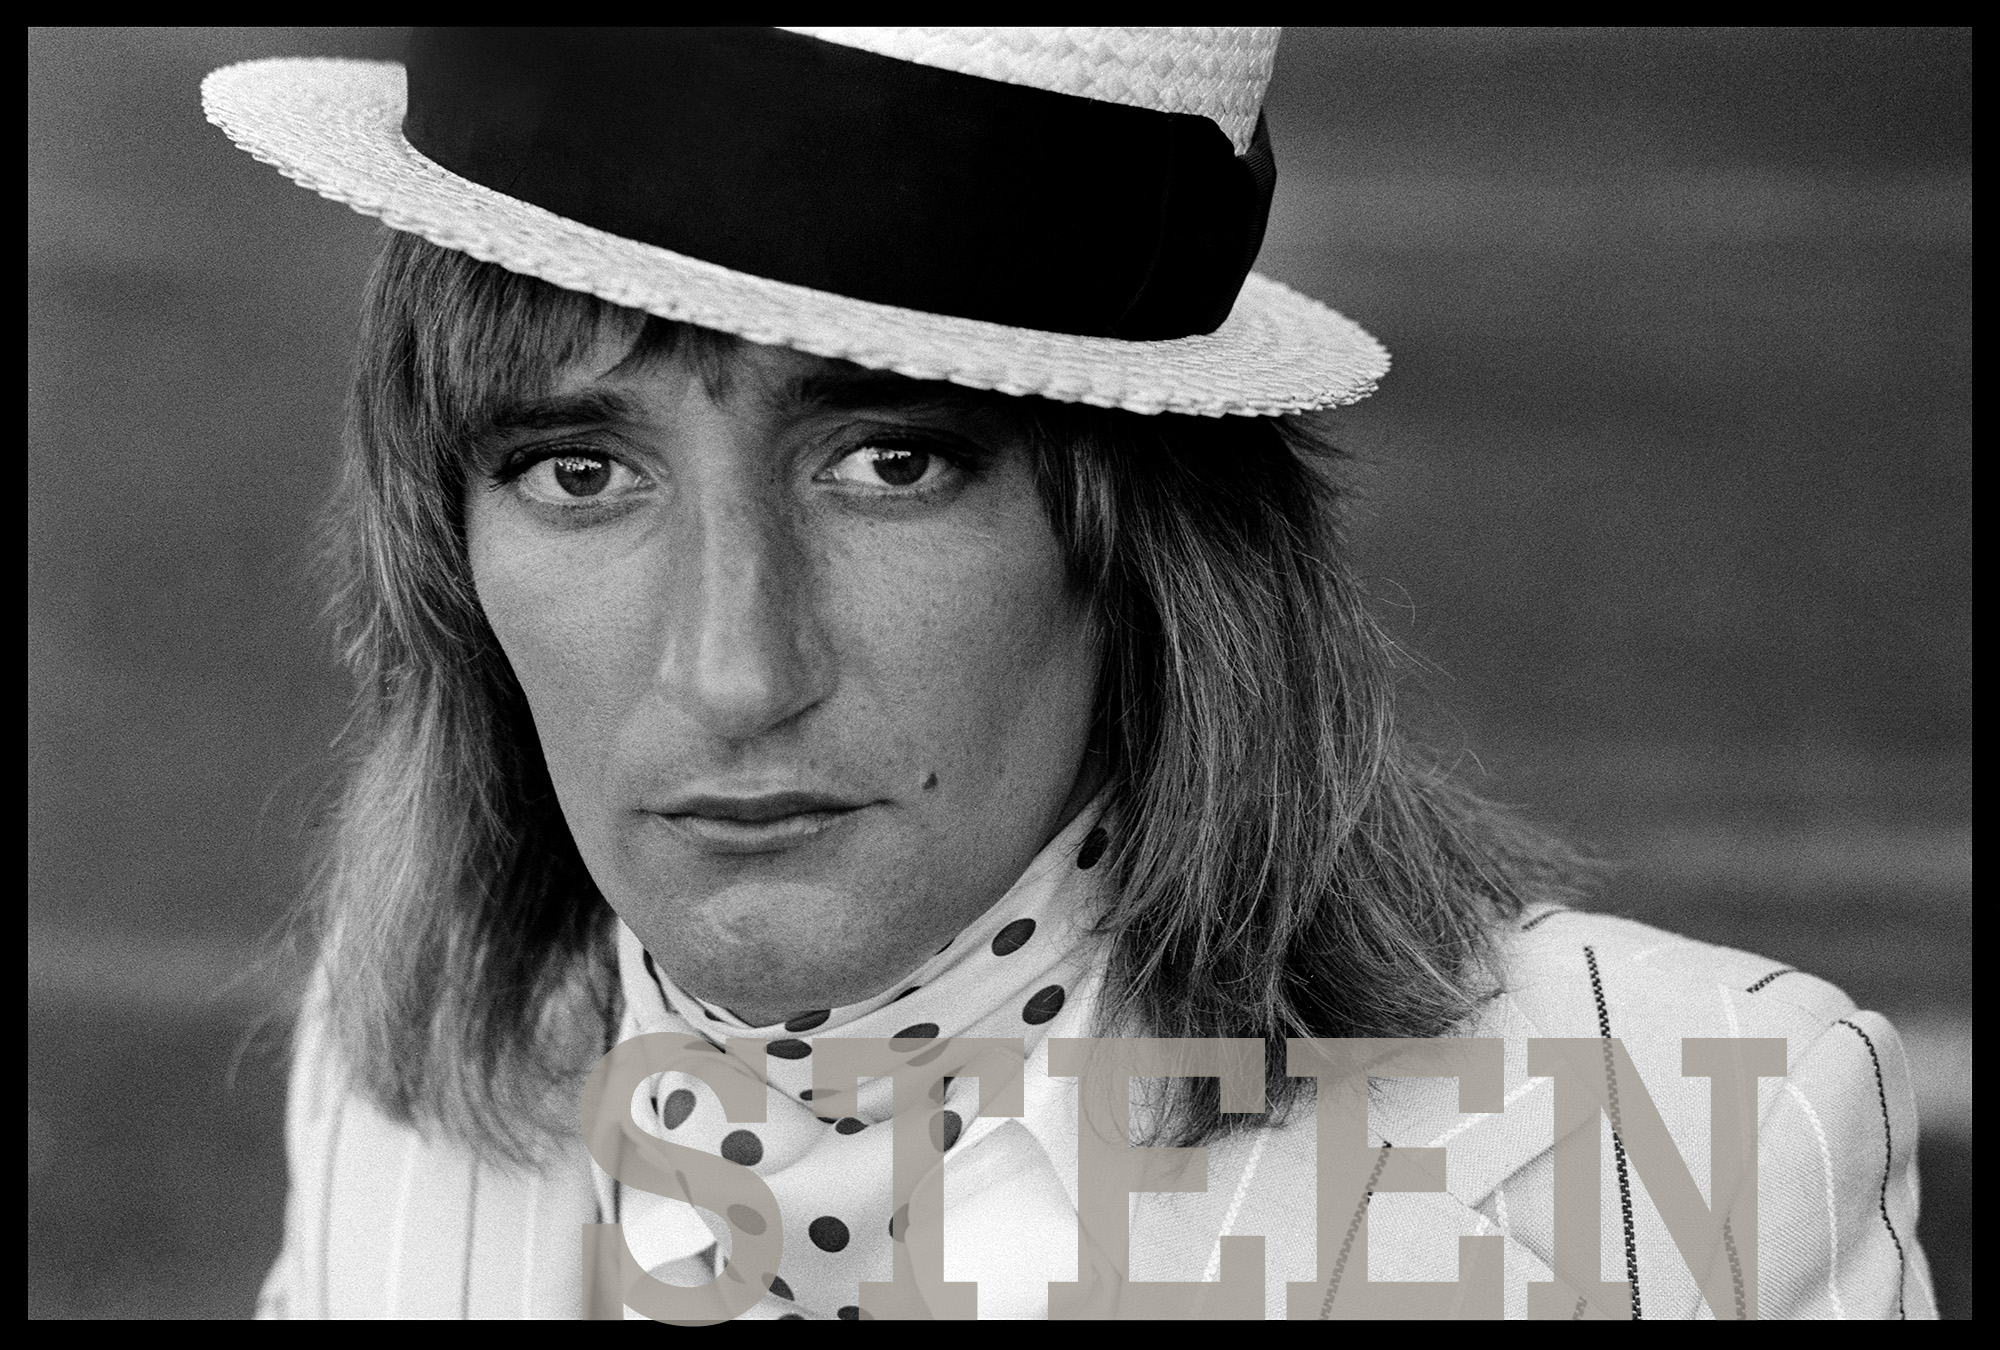 limited edition photograph of rod stewart by photographer david steen